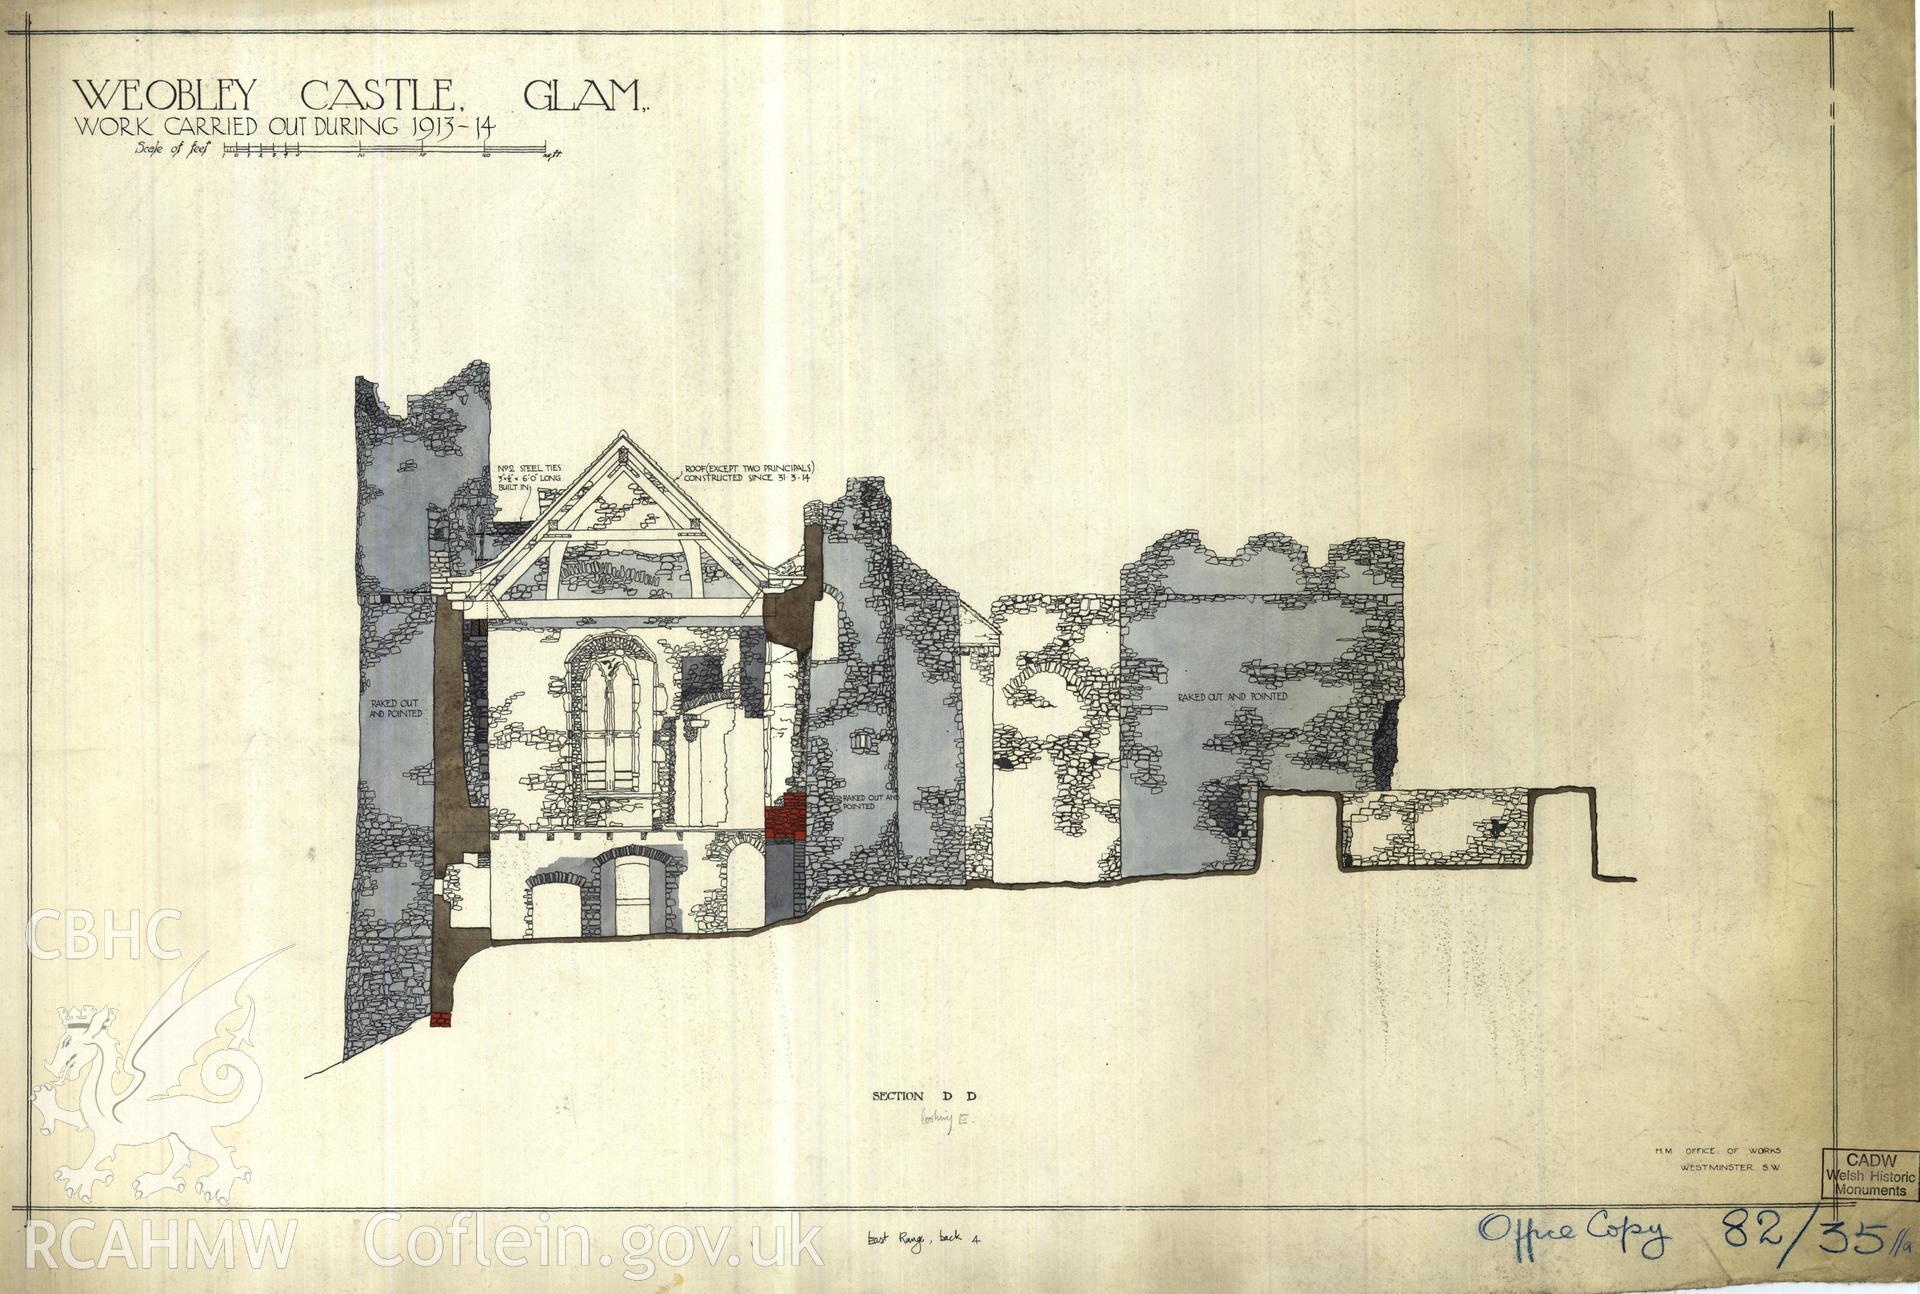 Cadw guardianship monument drawing of Weobley Castle. E range, rear elevation, print. Cadw Ref. No:82/35//a. Scale 1:48.